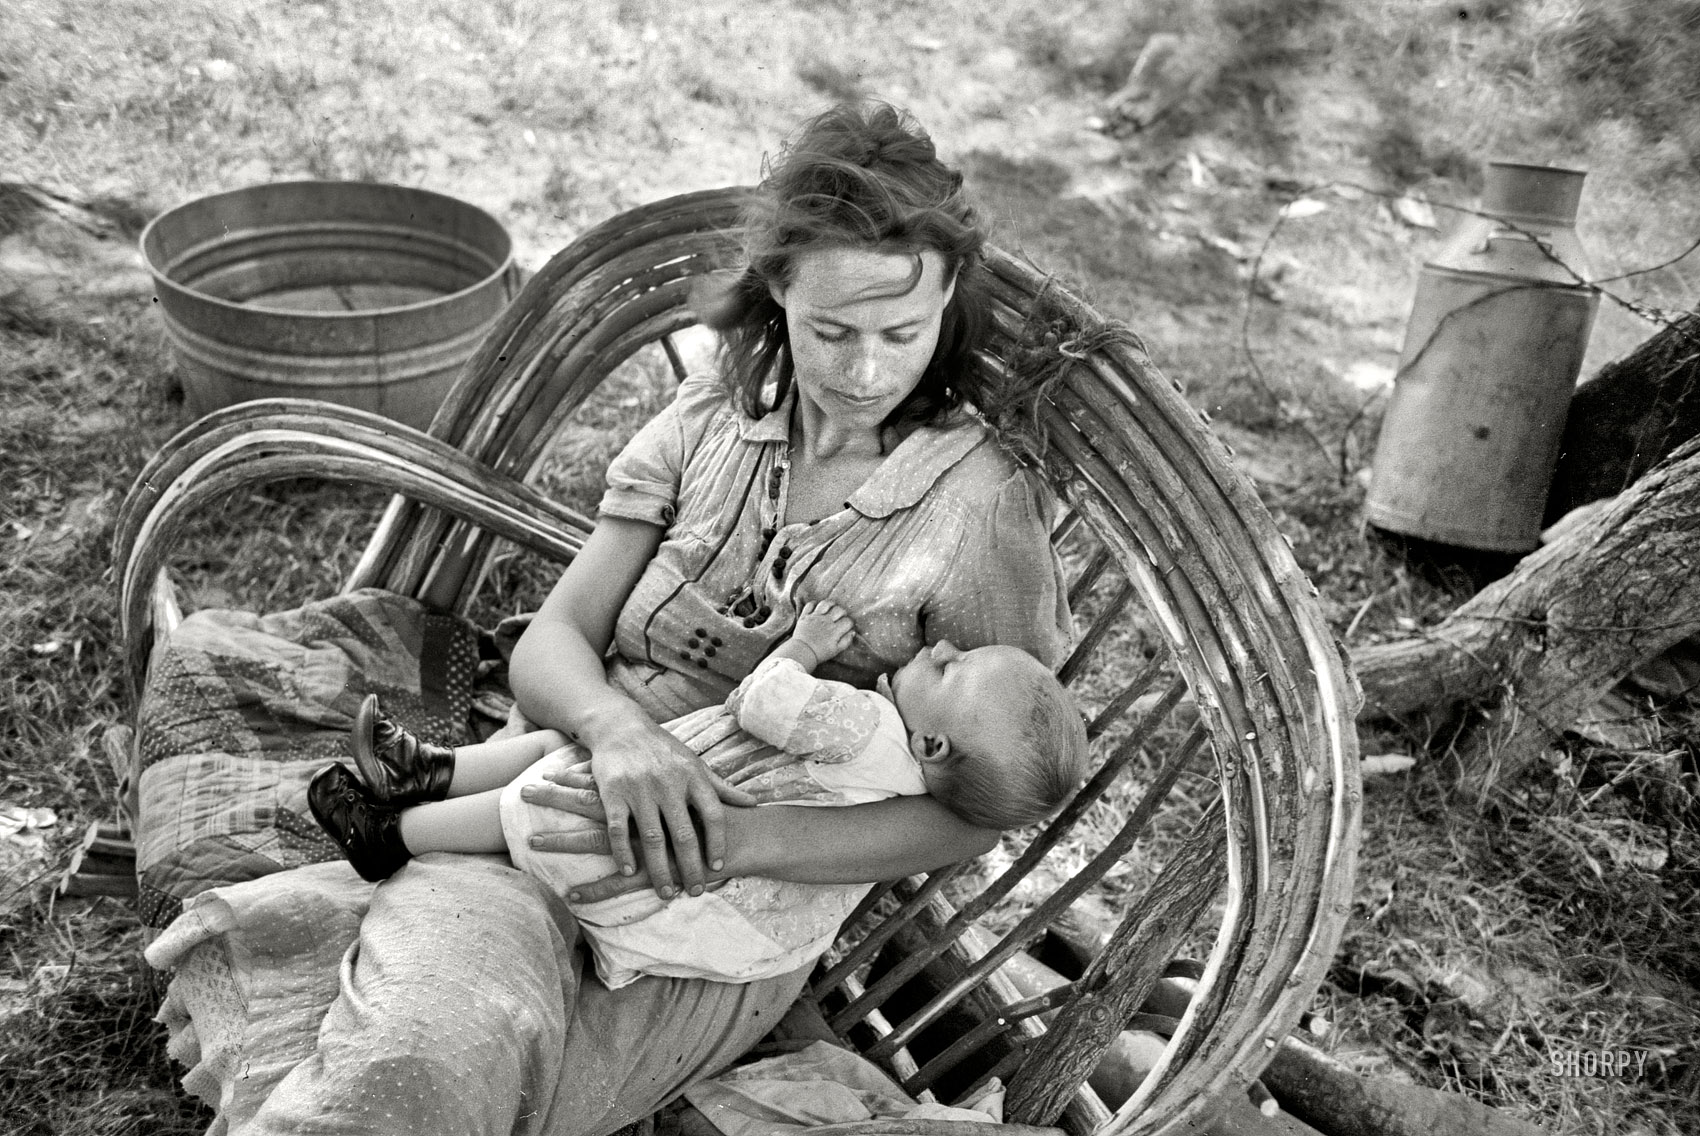 June 1939. "Wife and baby of itinerant cane furniture maker and agricultural day laborer camped in Wagoner County, Oklahoma." 35mm nitrate negative by Russell Lee for the Farm Security Administration. View full size.